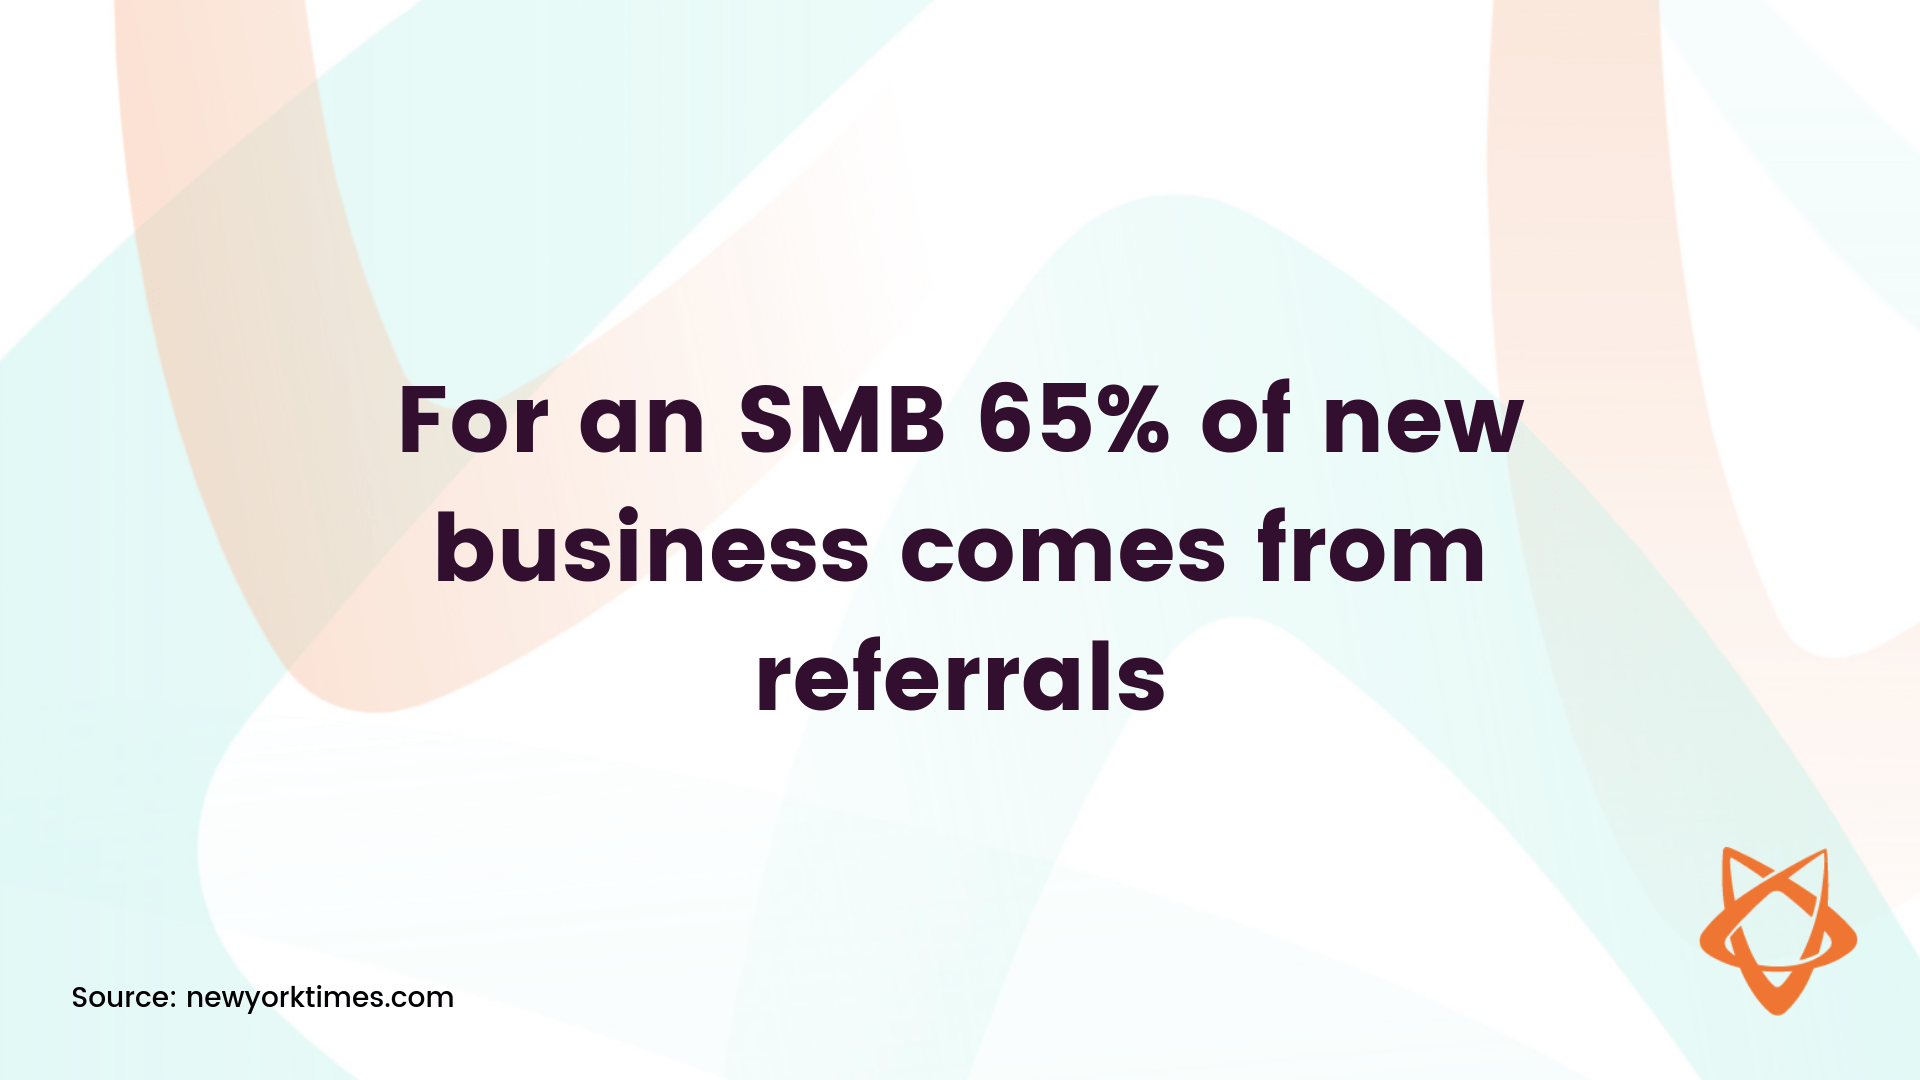 stat saying that for an SMB 65% of new business comes from referrals